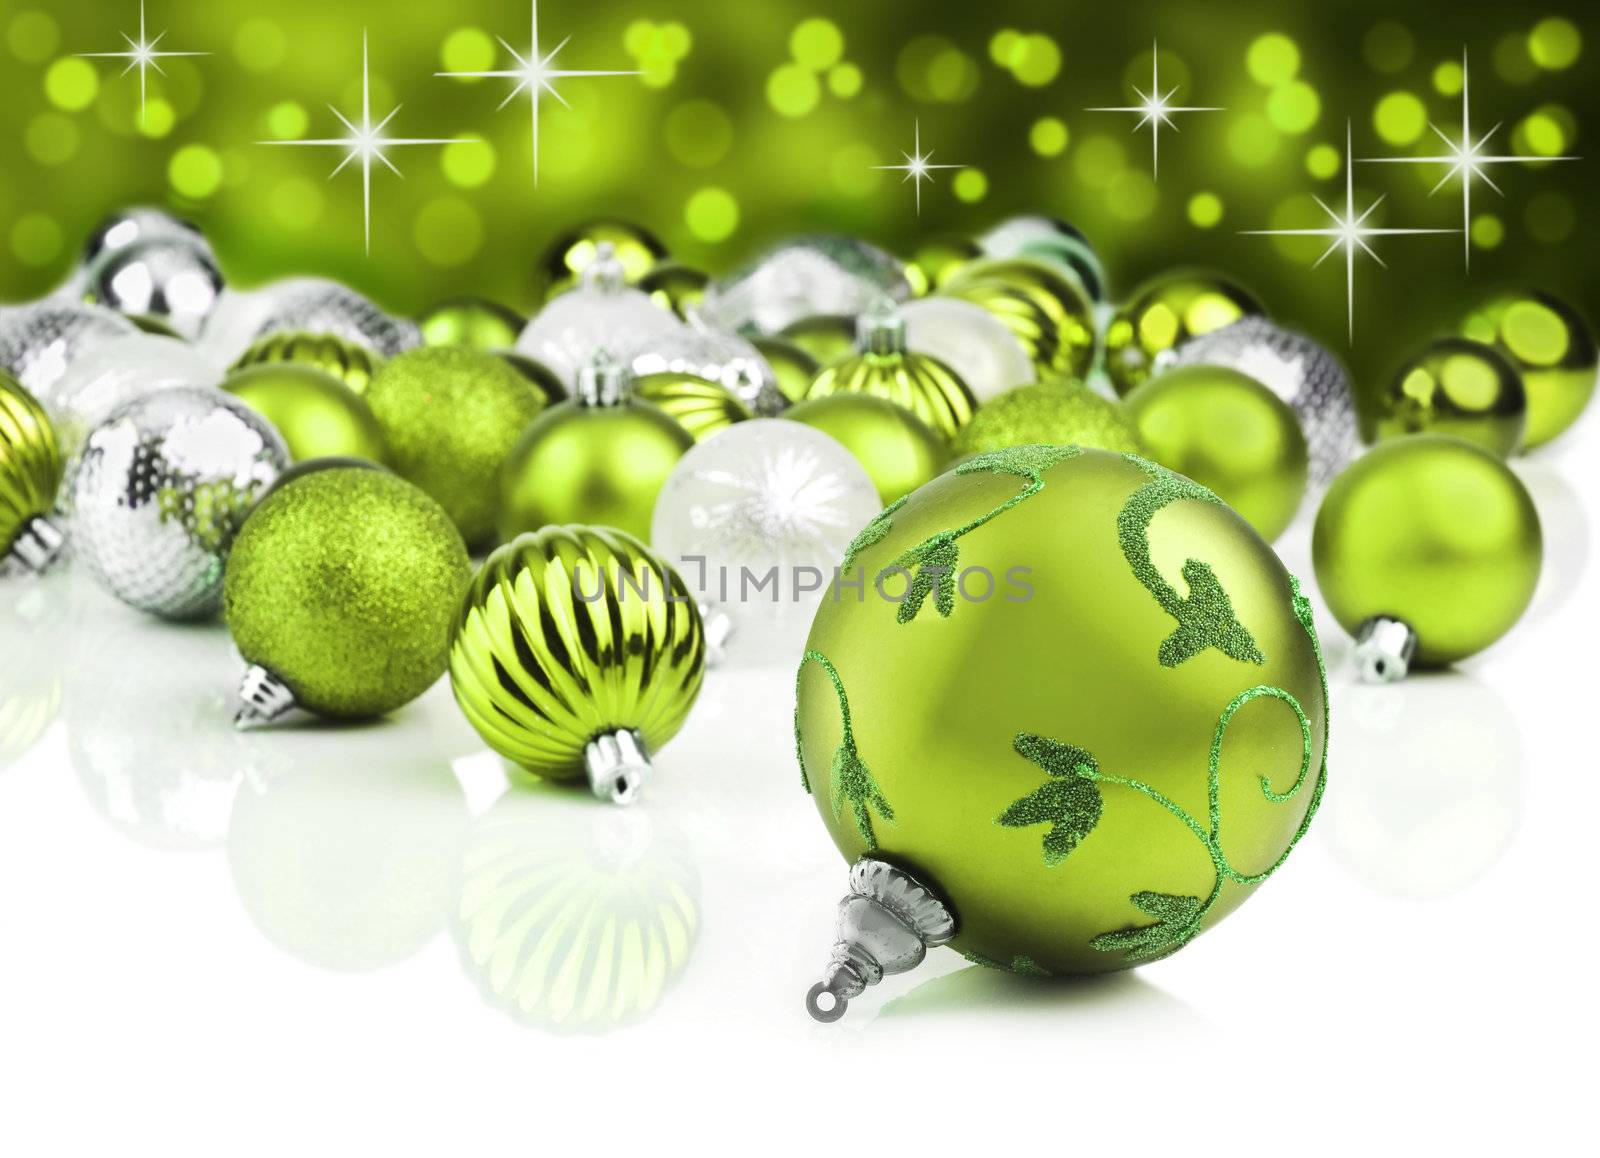 Green christmas ornament baubles with star background